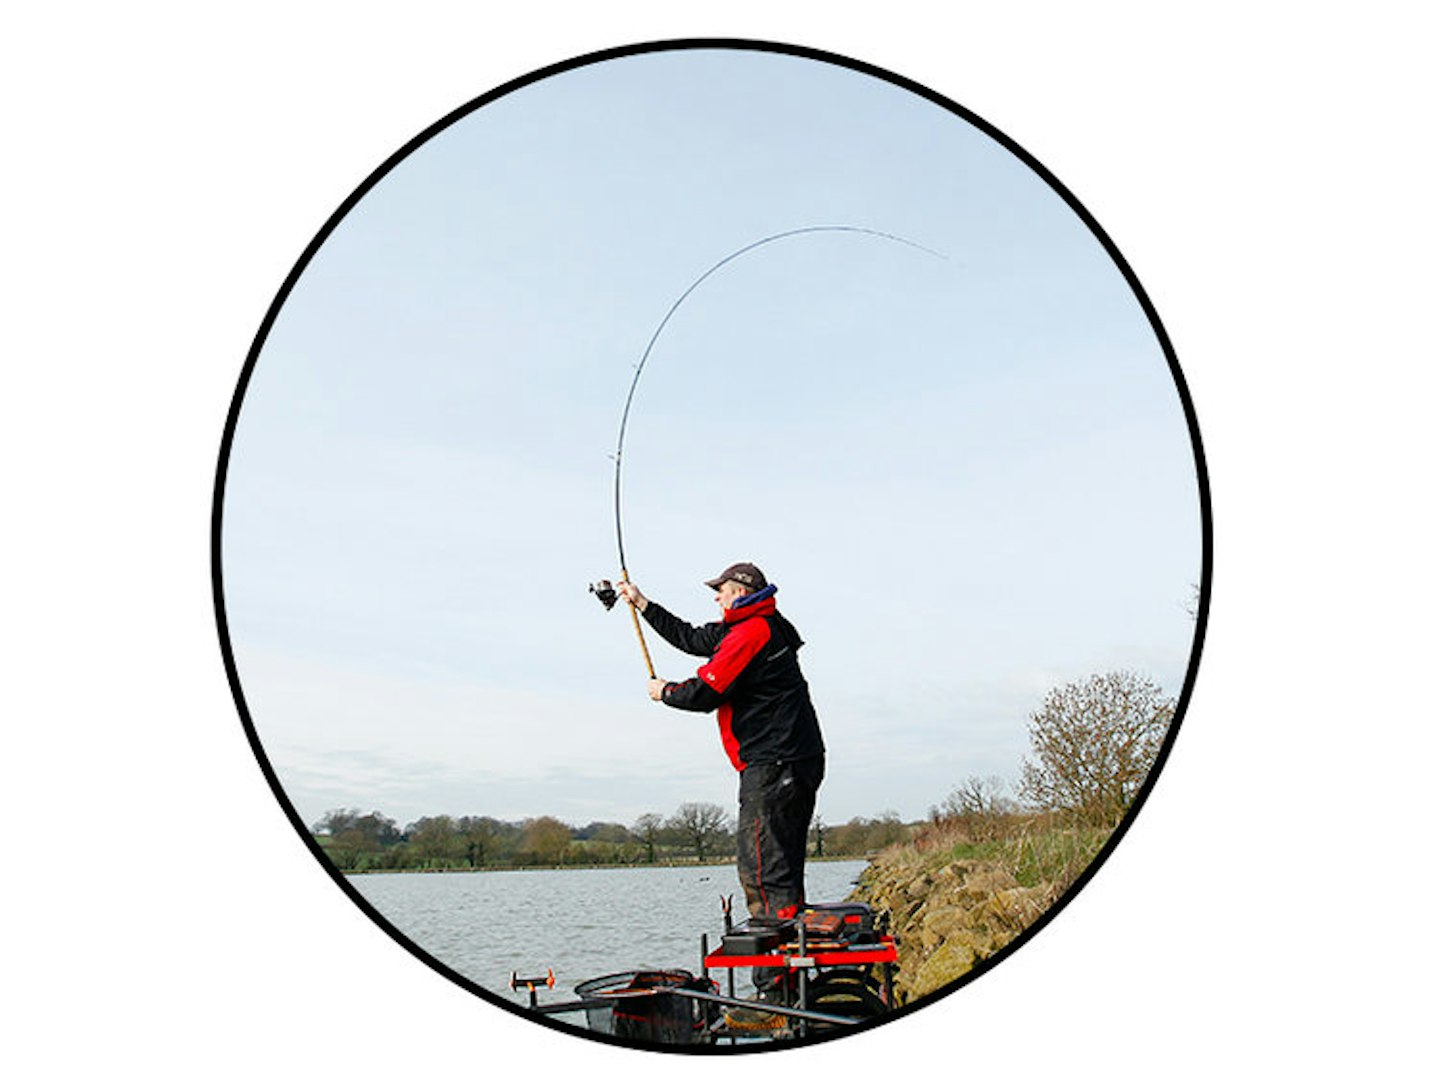 8 TIPS TO HELP YOU CATCH MORE FISH